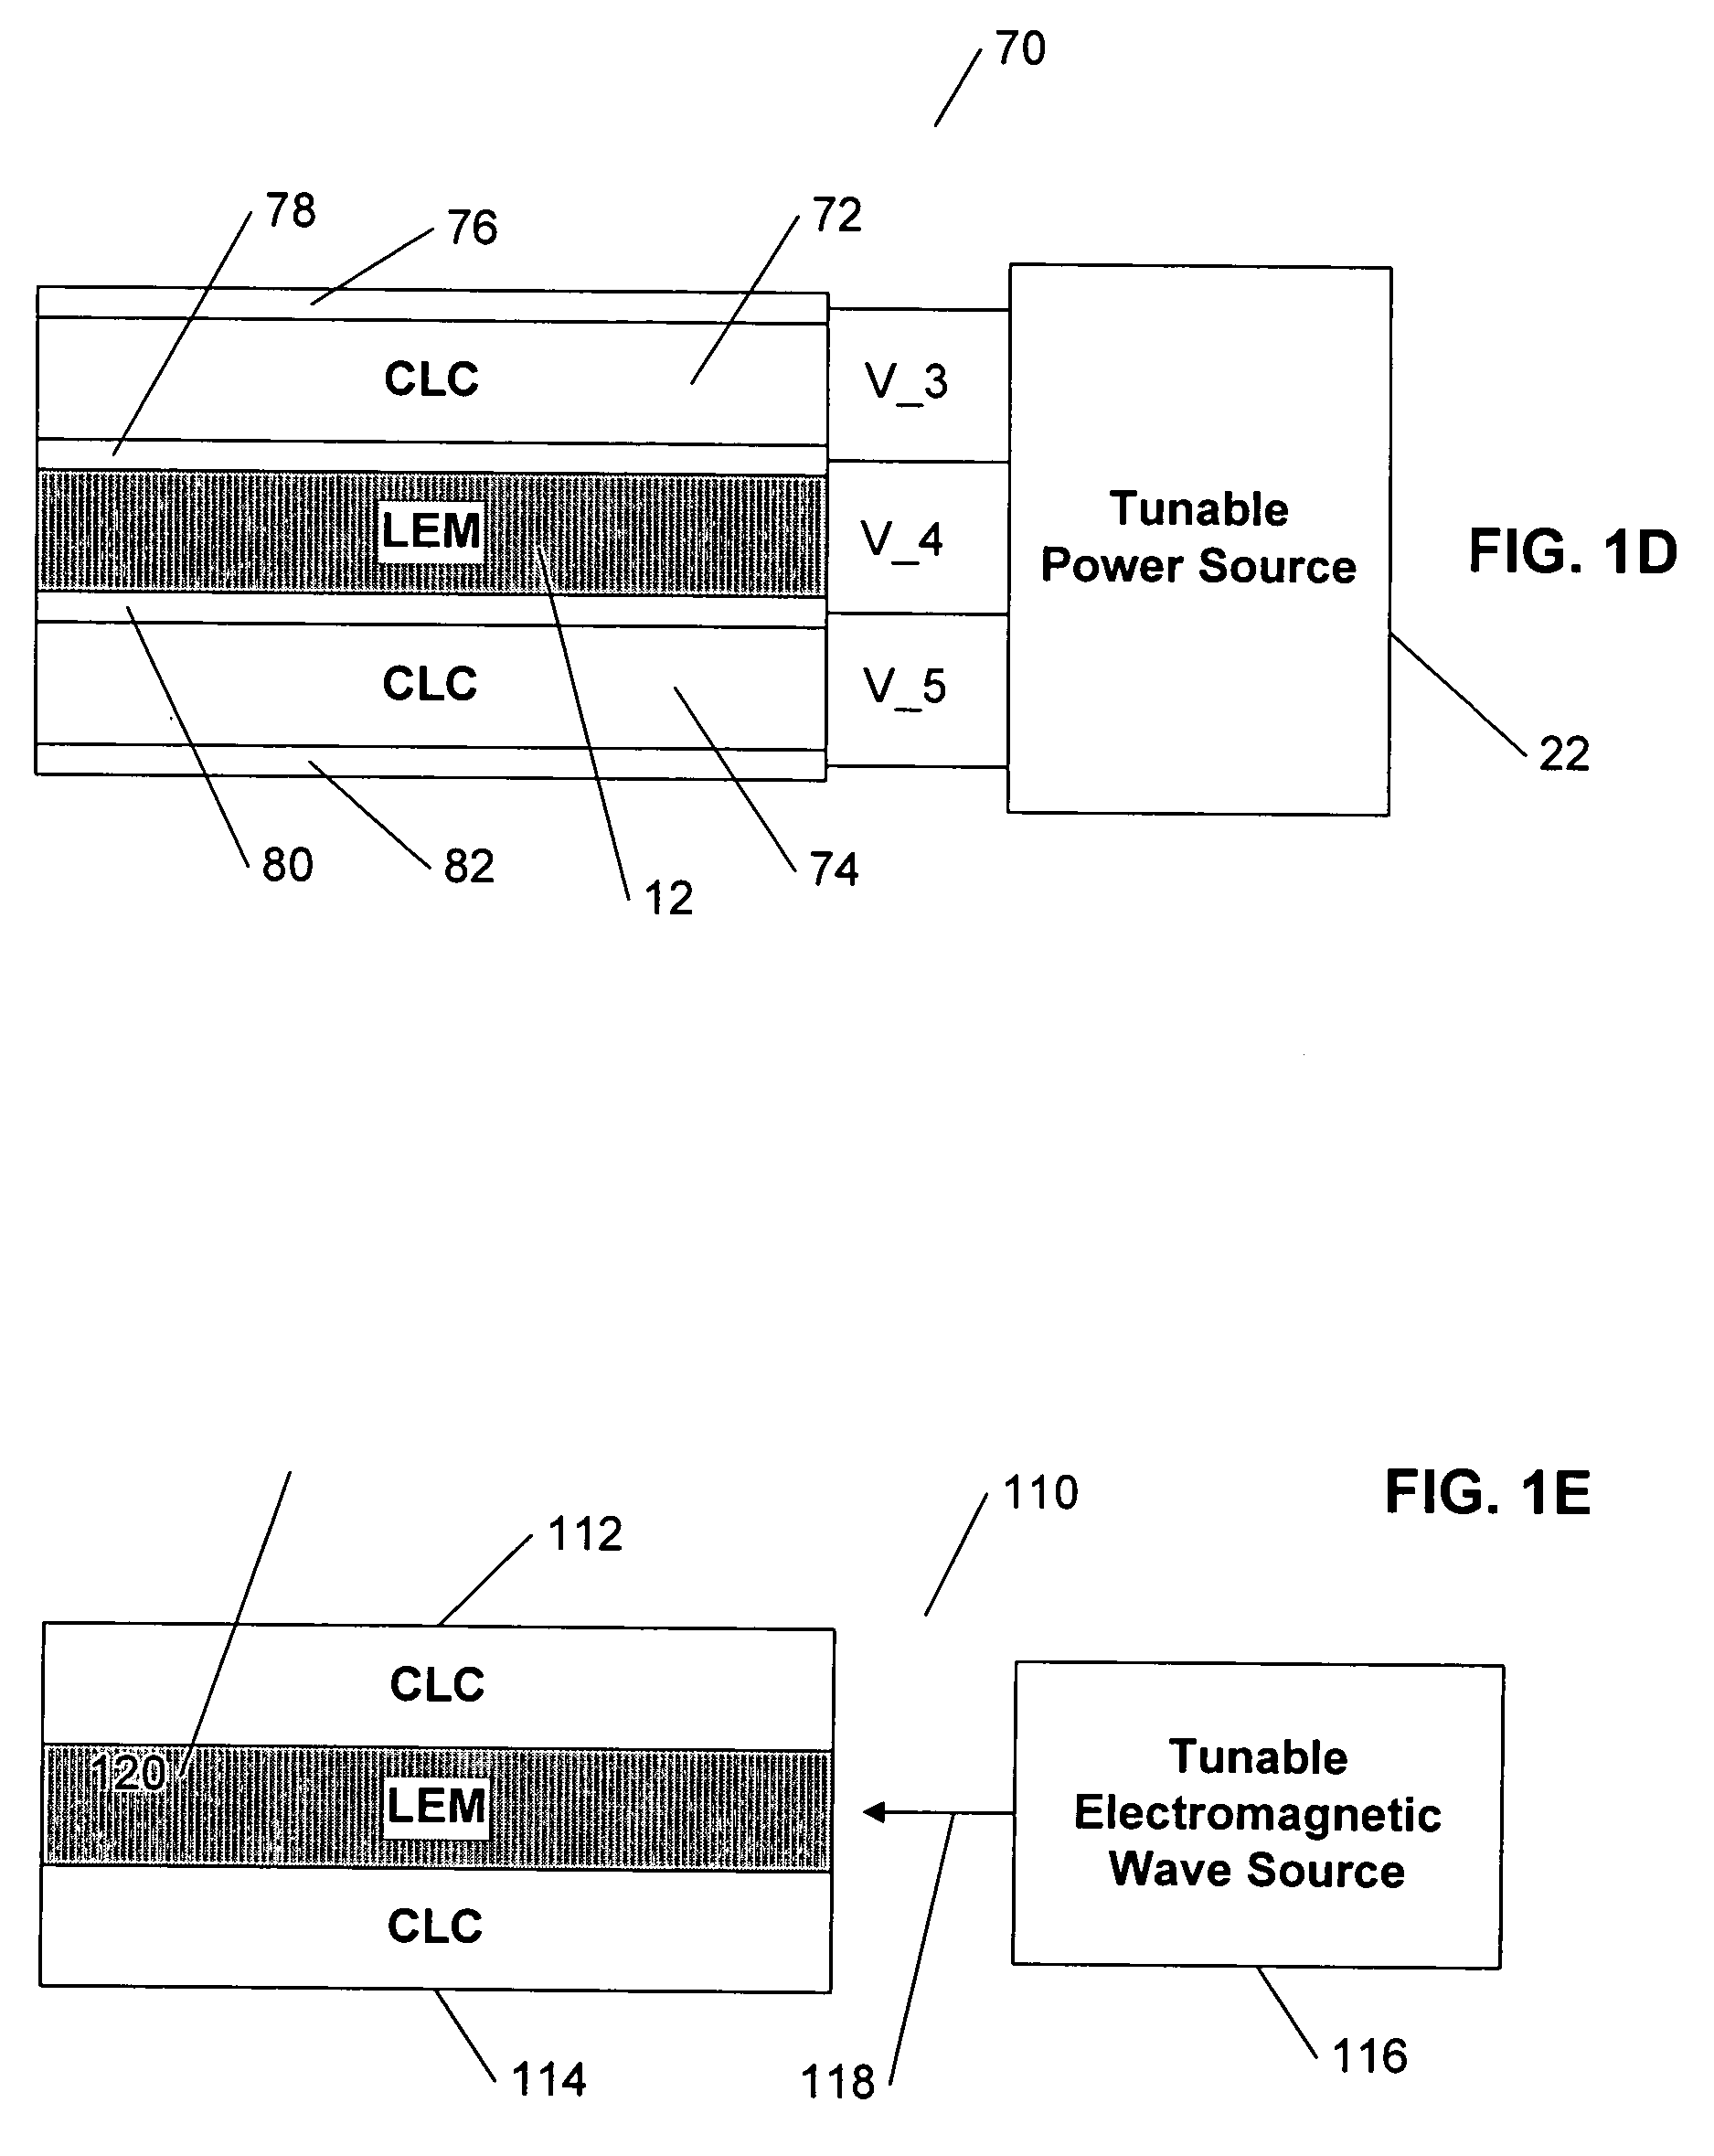 Thin-film large-area coherent light source, filter and amplifier apparatus and method